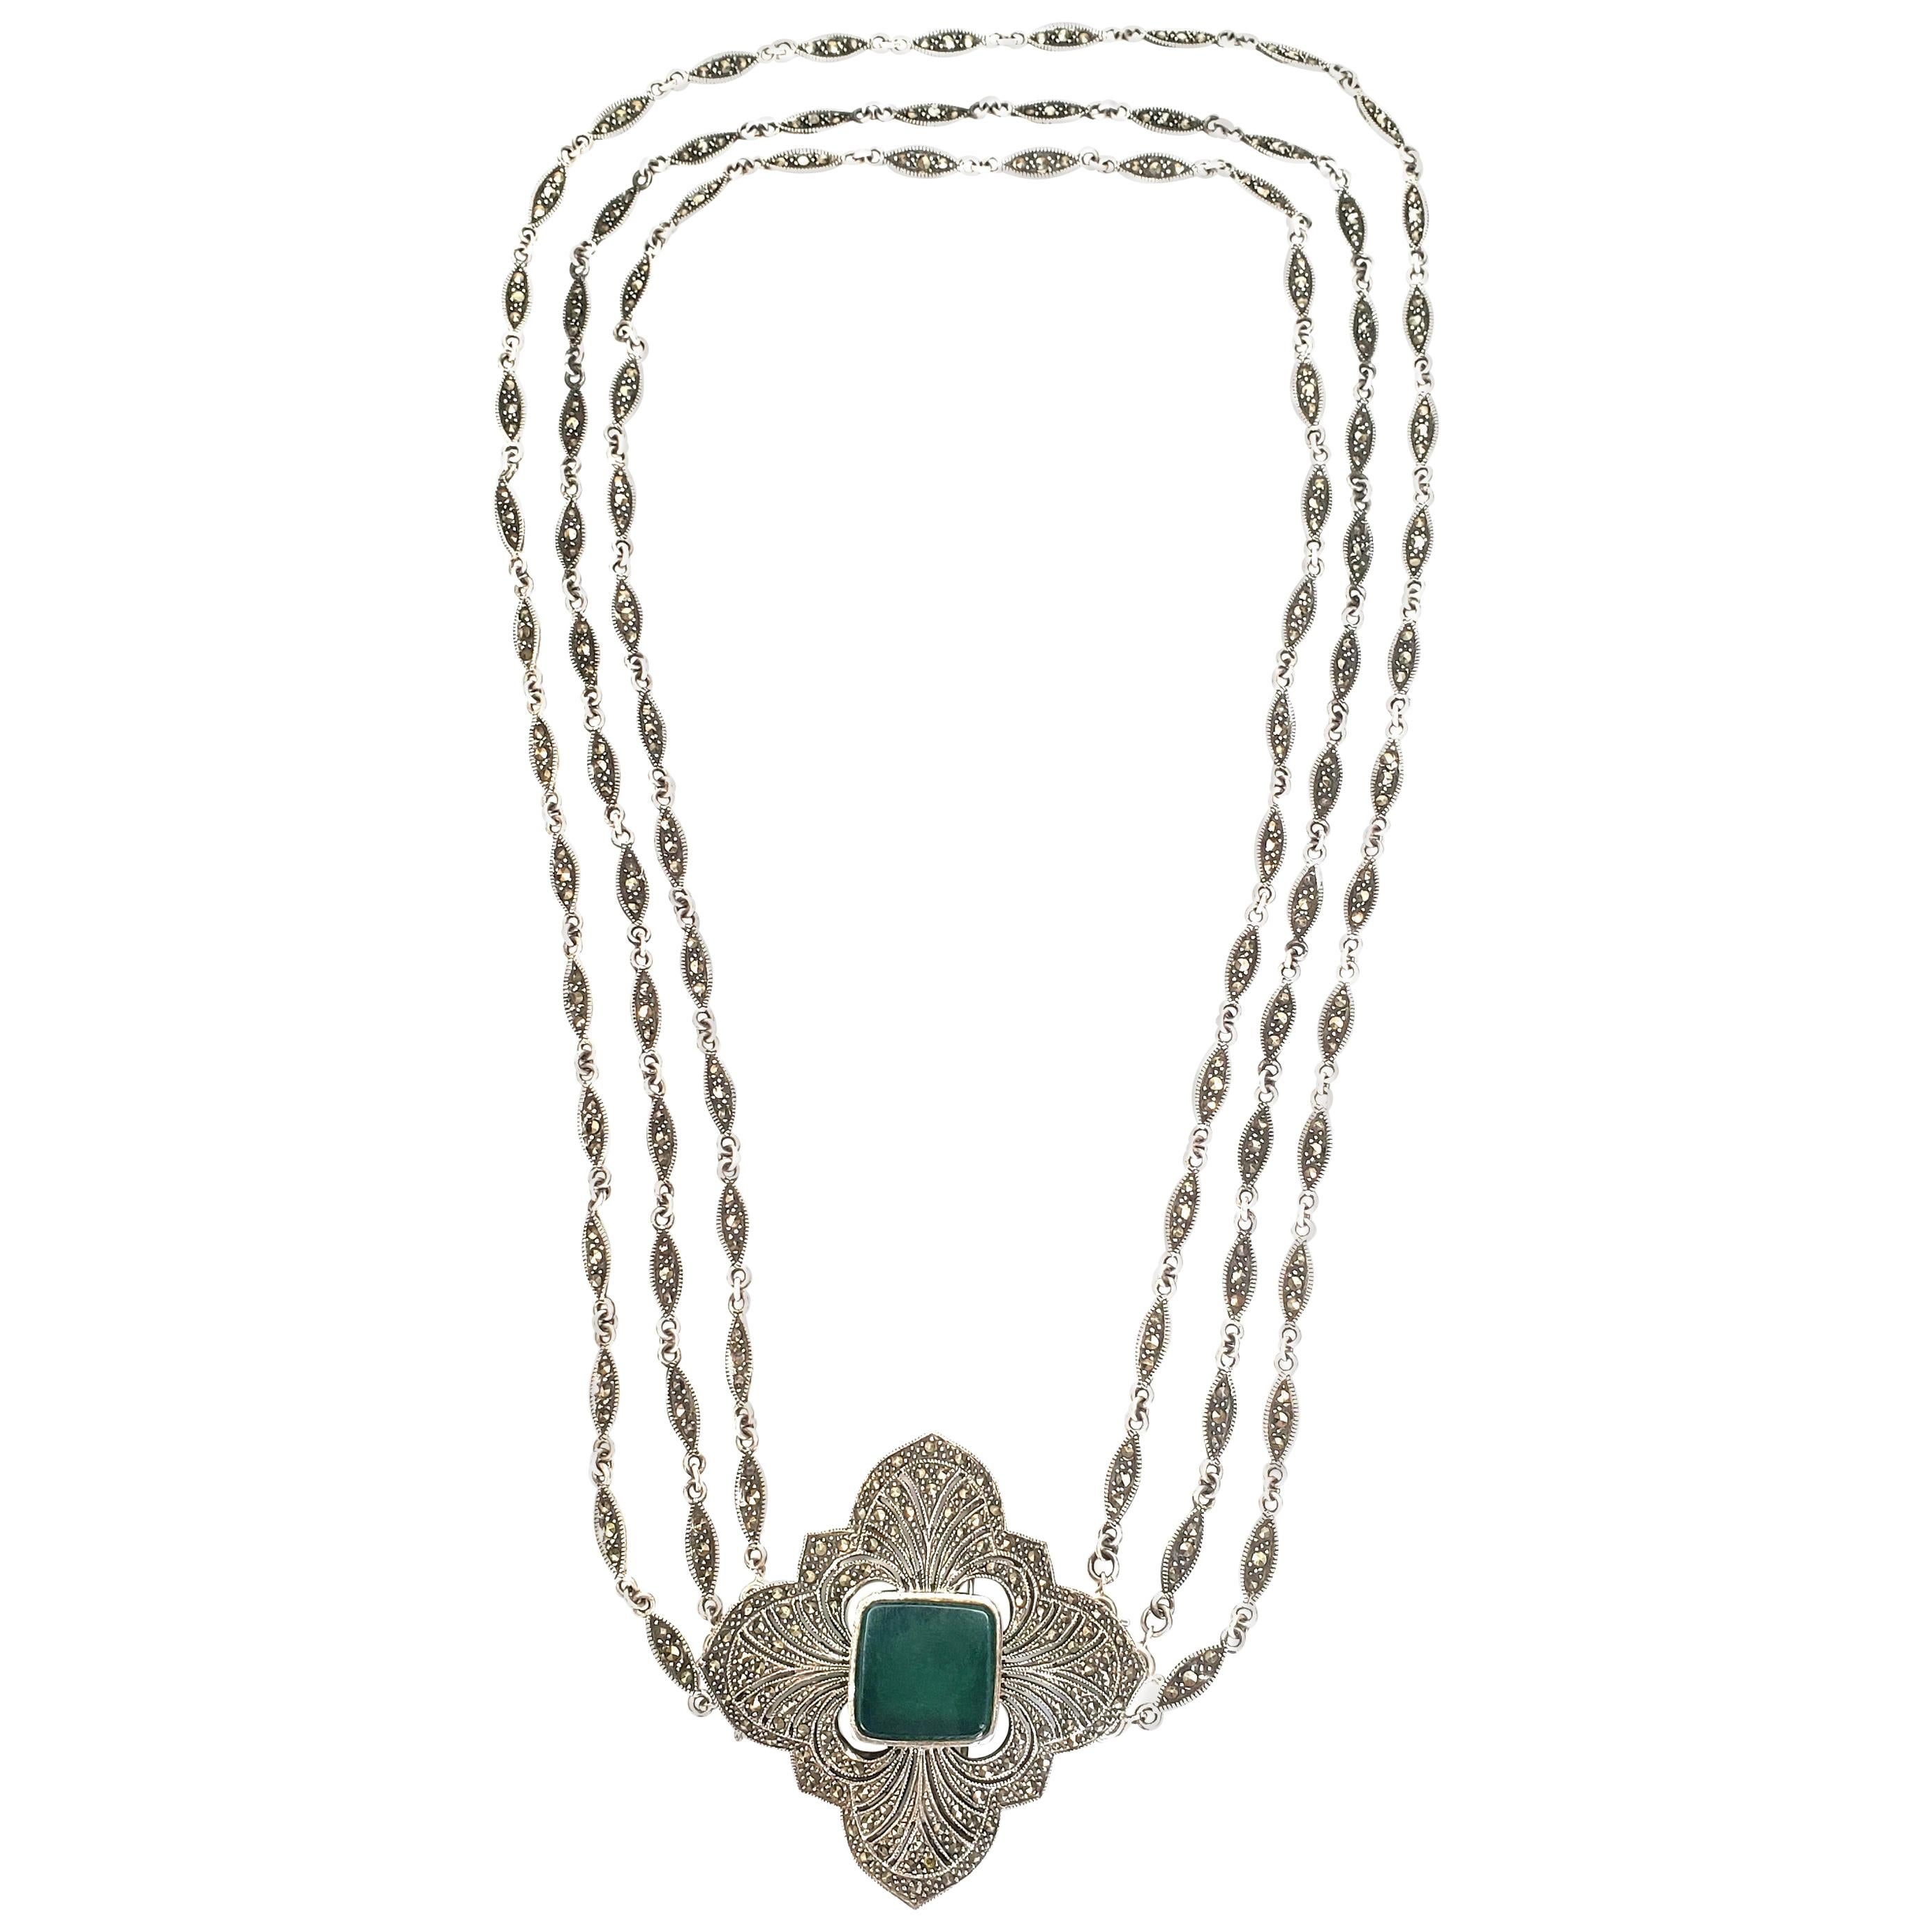 Sterl Silver Chrysoprase Marcasite 3 Strand Necklace with Pendant